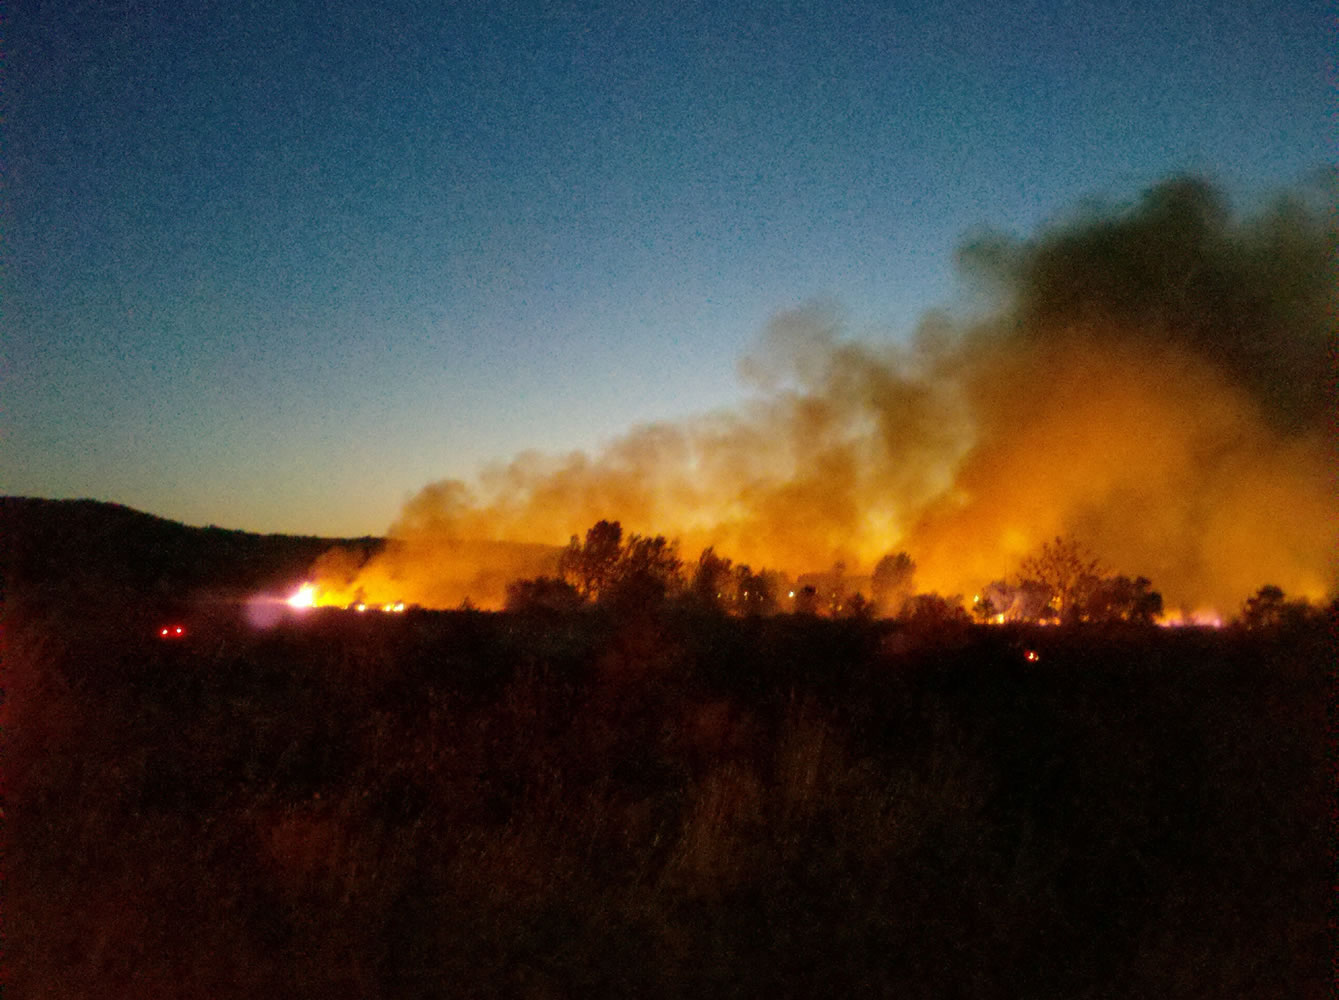 A fire in the vicinity of the Steigerwald National Wildlife Refuge consumed more than 40 acres Friday night. The cause of the fire was a discarded cigarette butt.